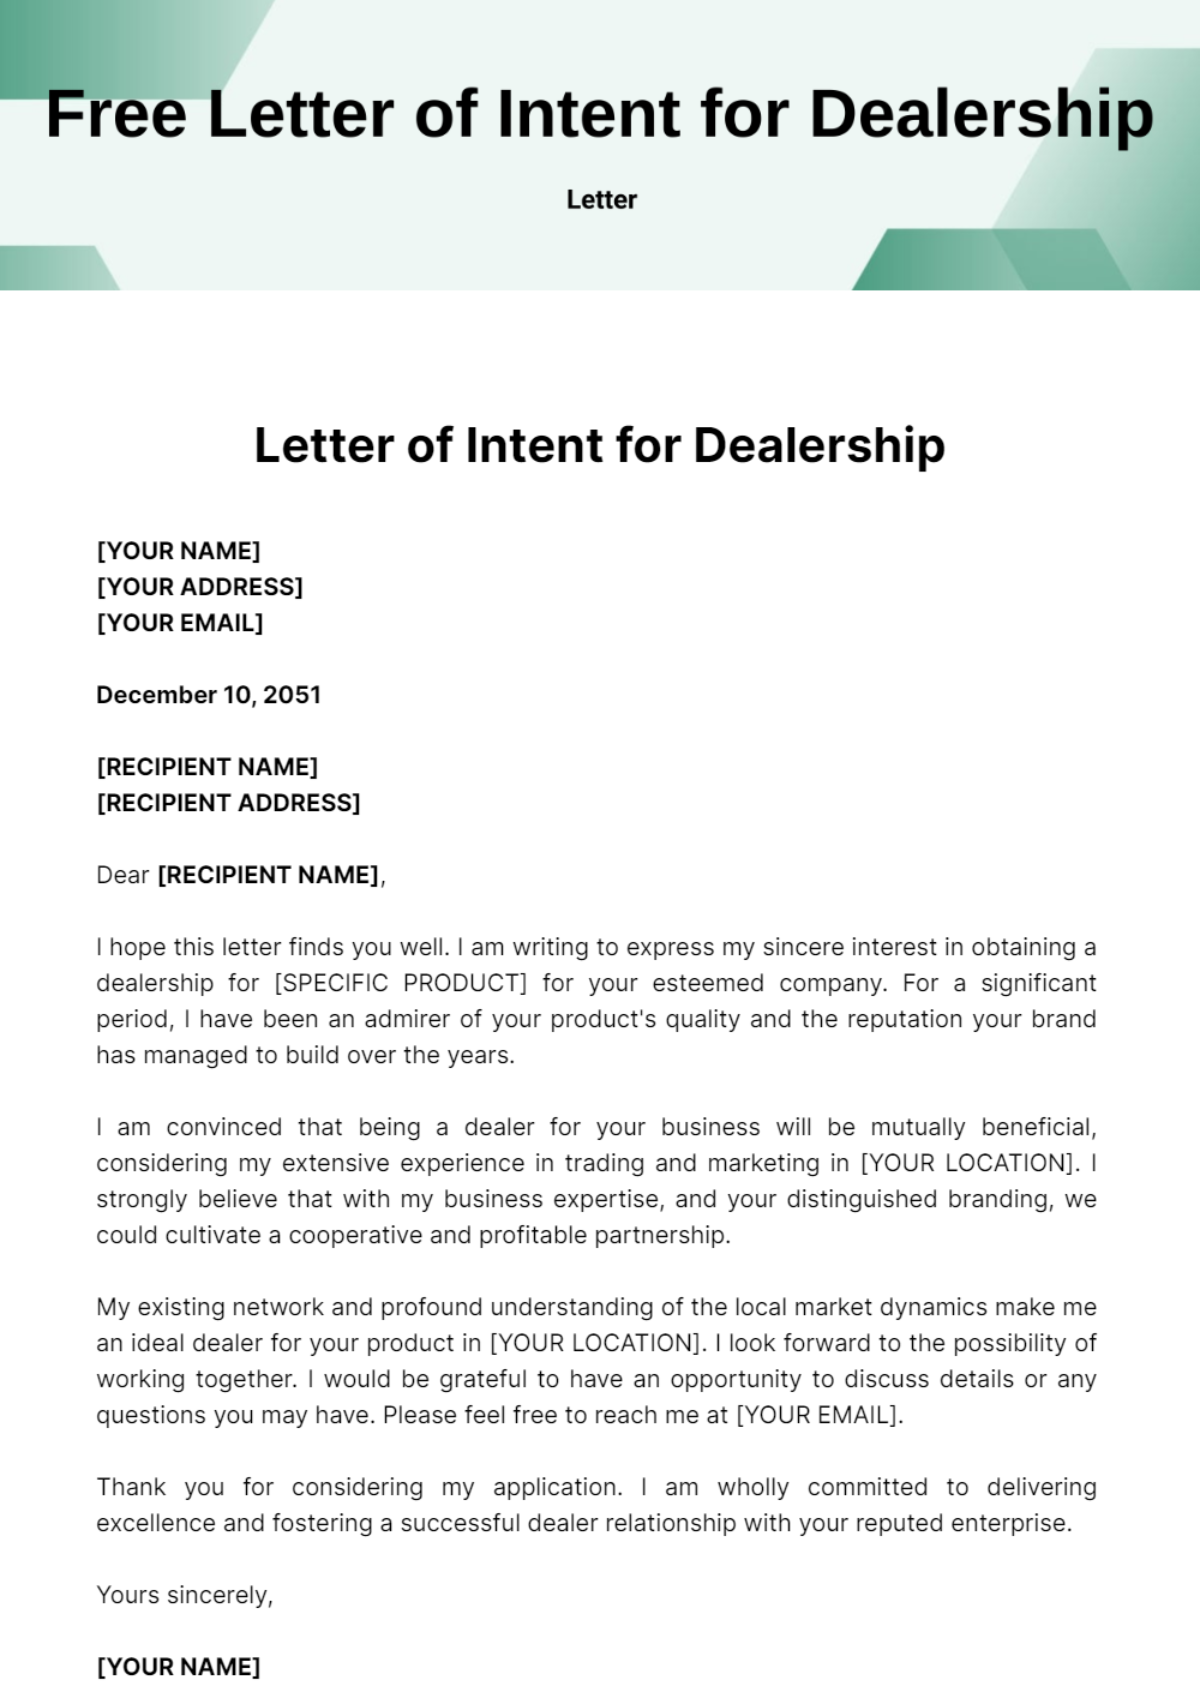 Free Letter of Intent for Dealership Template